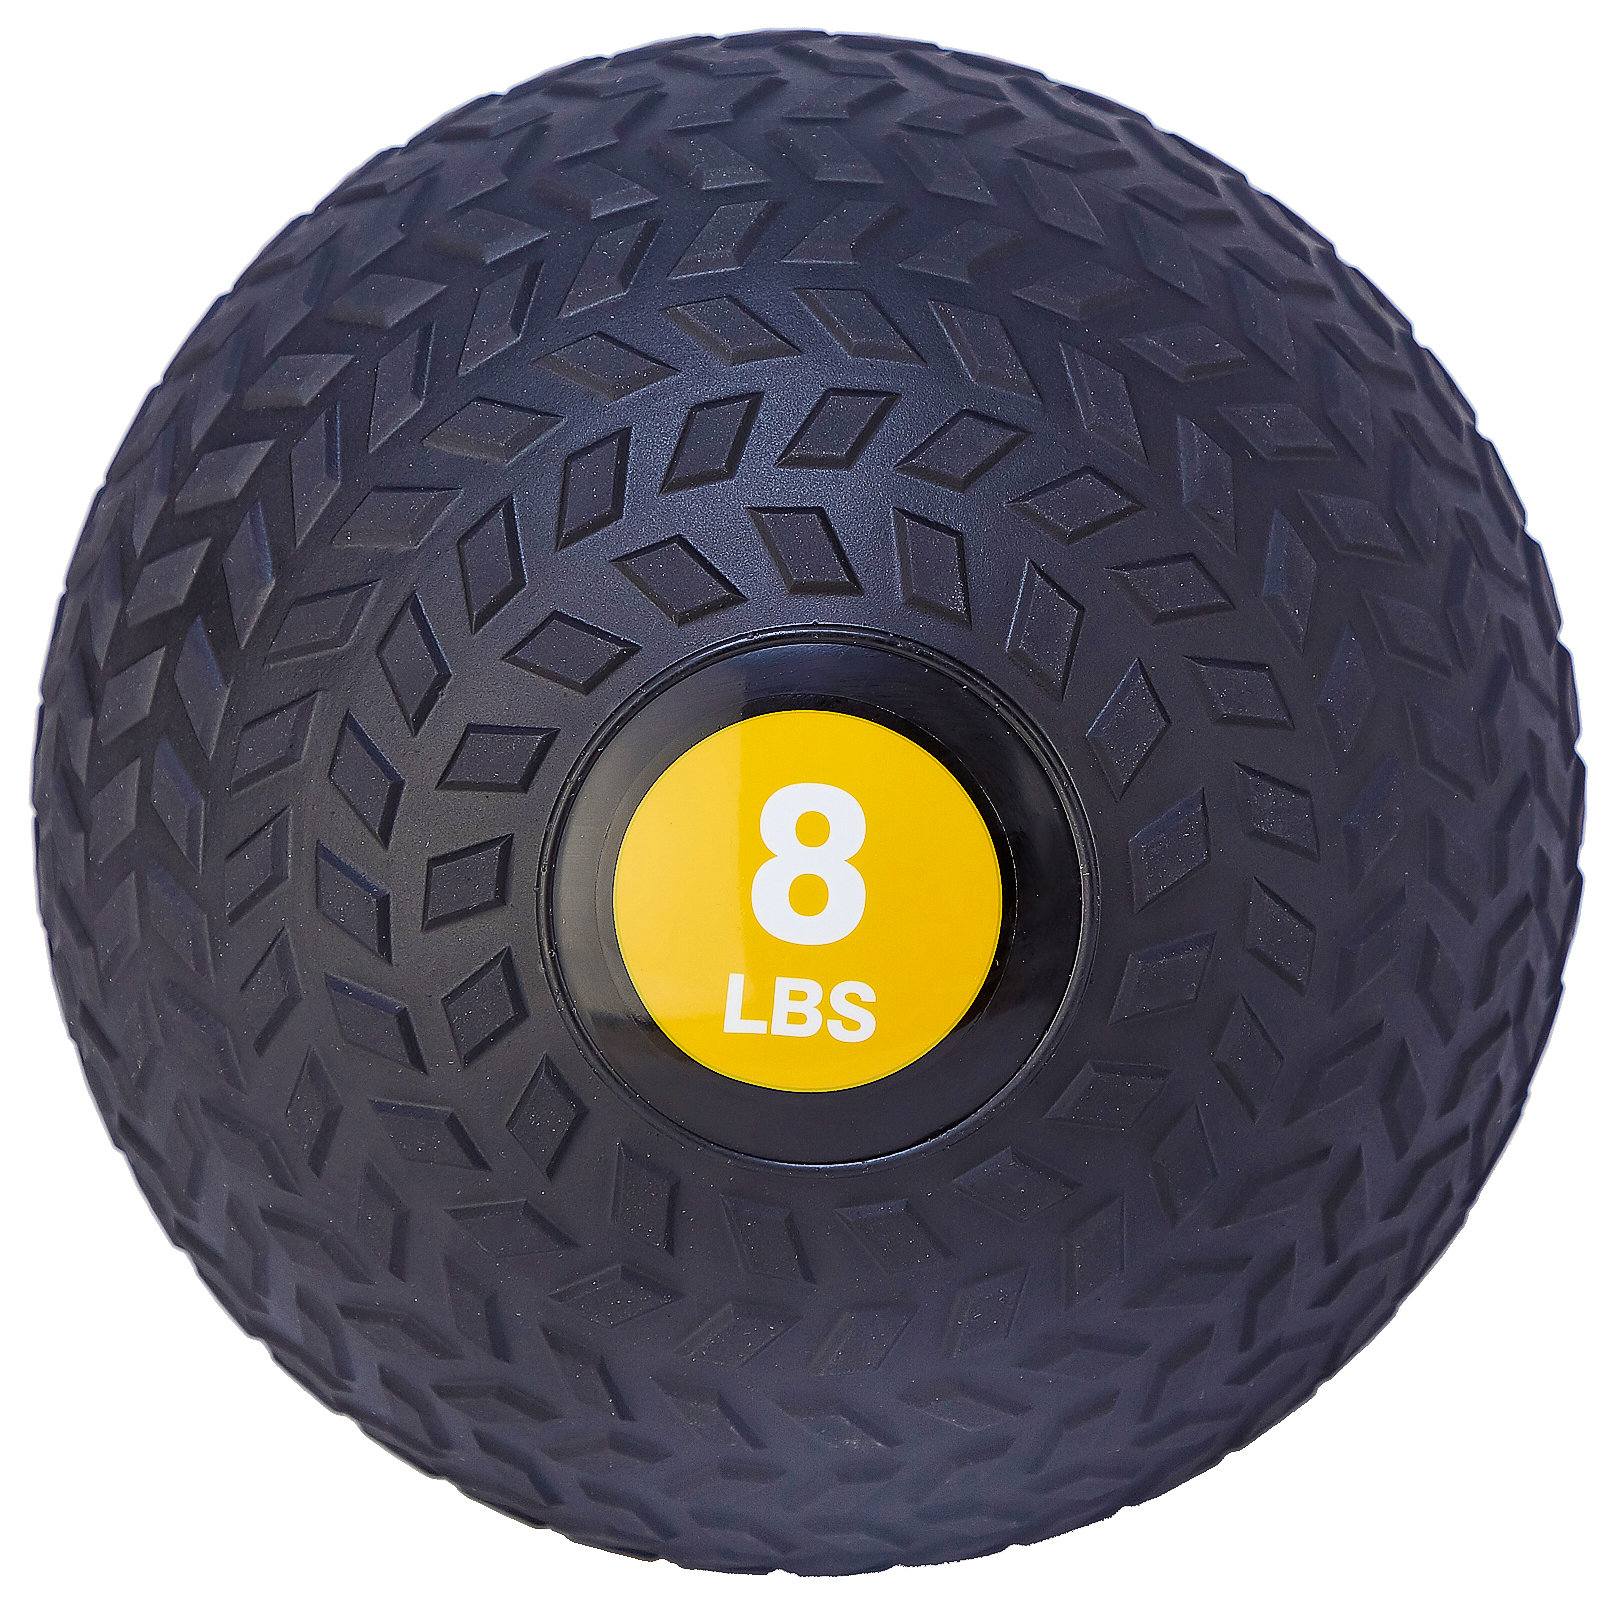 BalanceFrom Workout Exercise Fitness Weighted Slam Ball - image 2 of 5